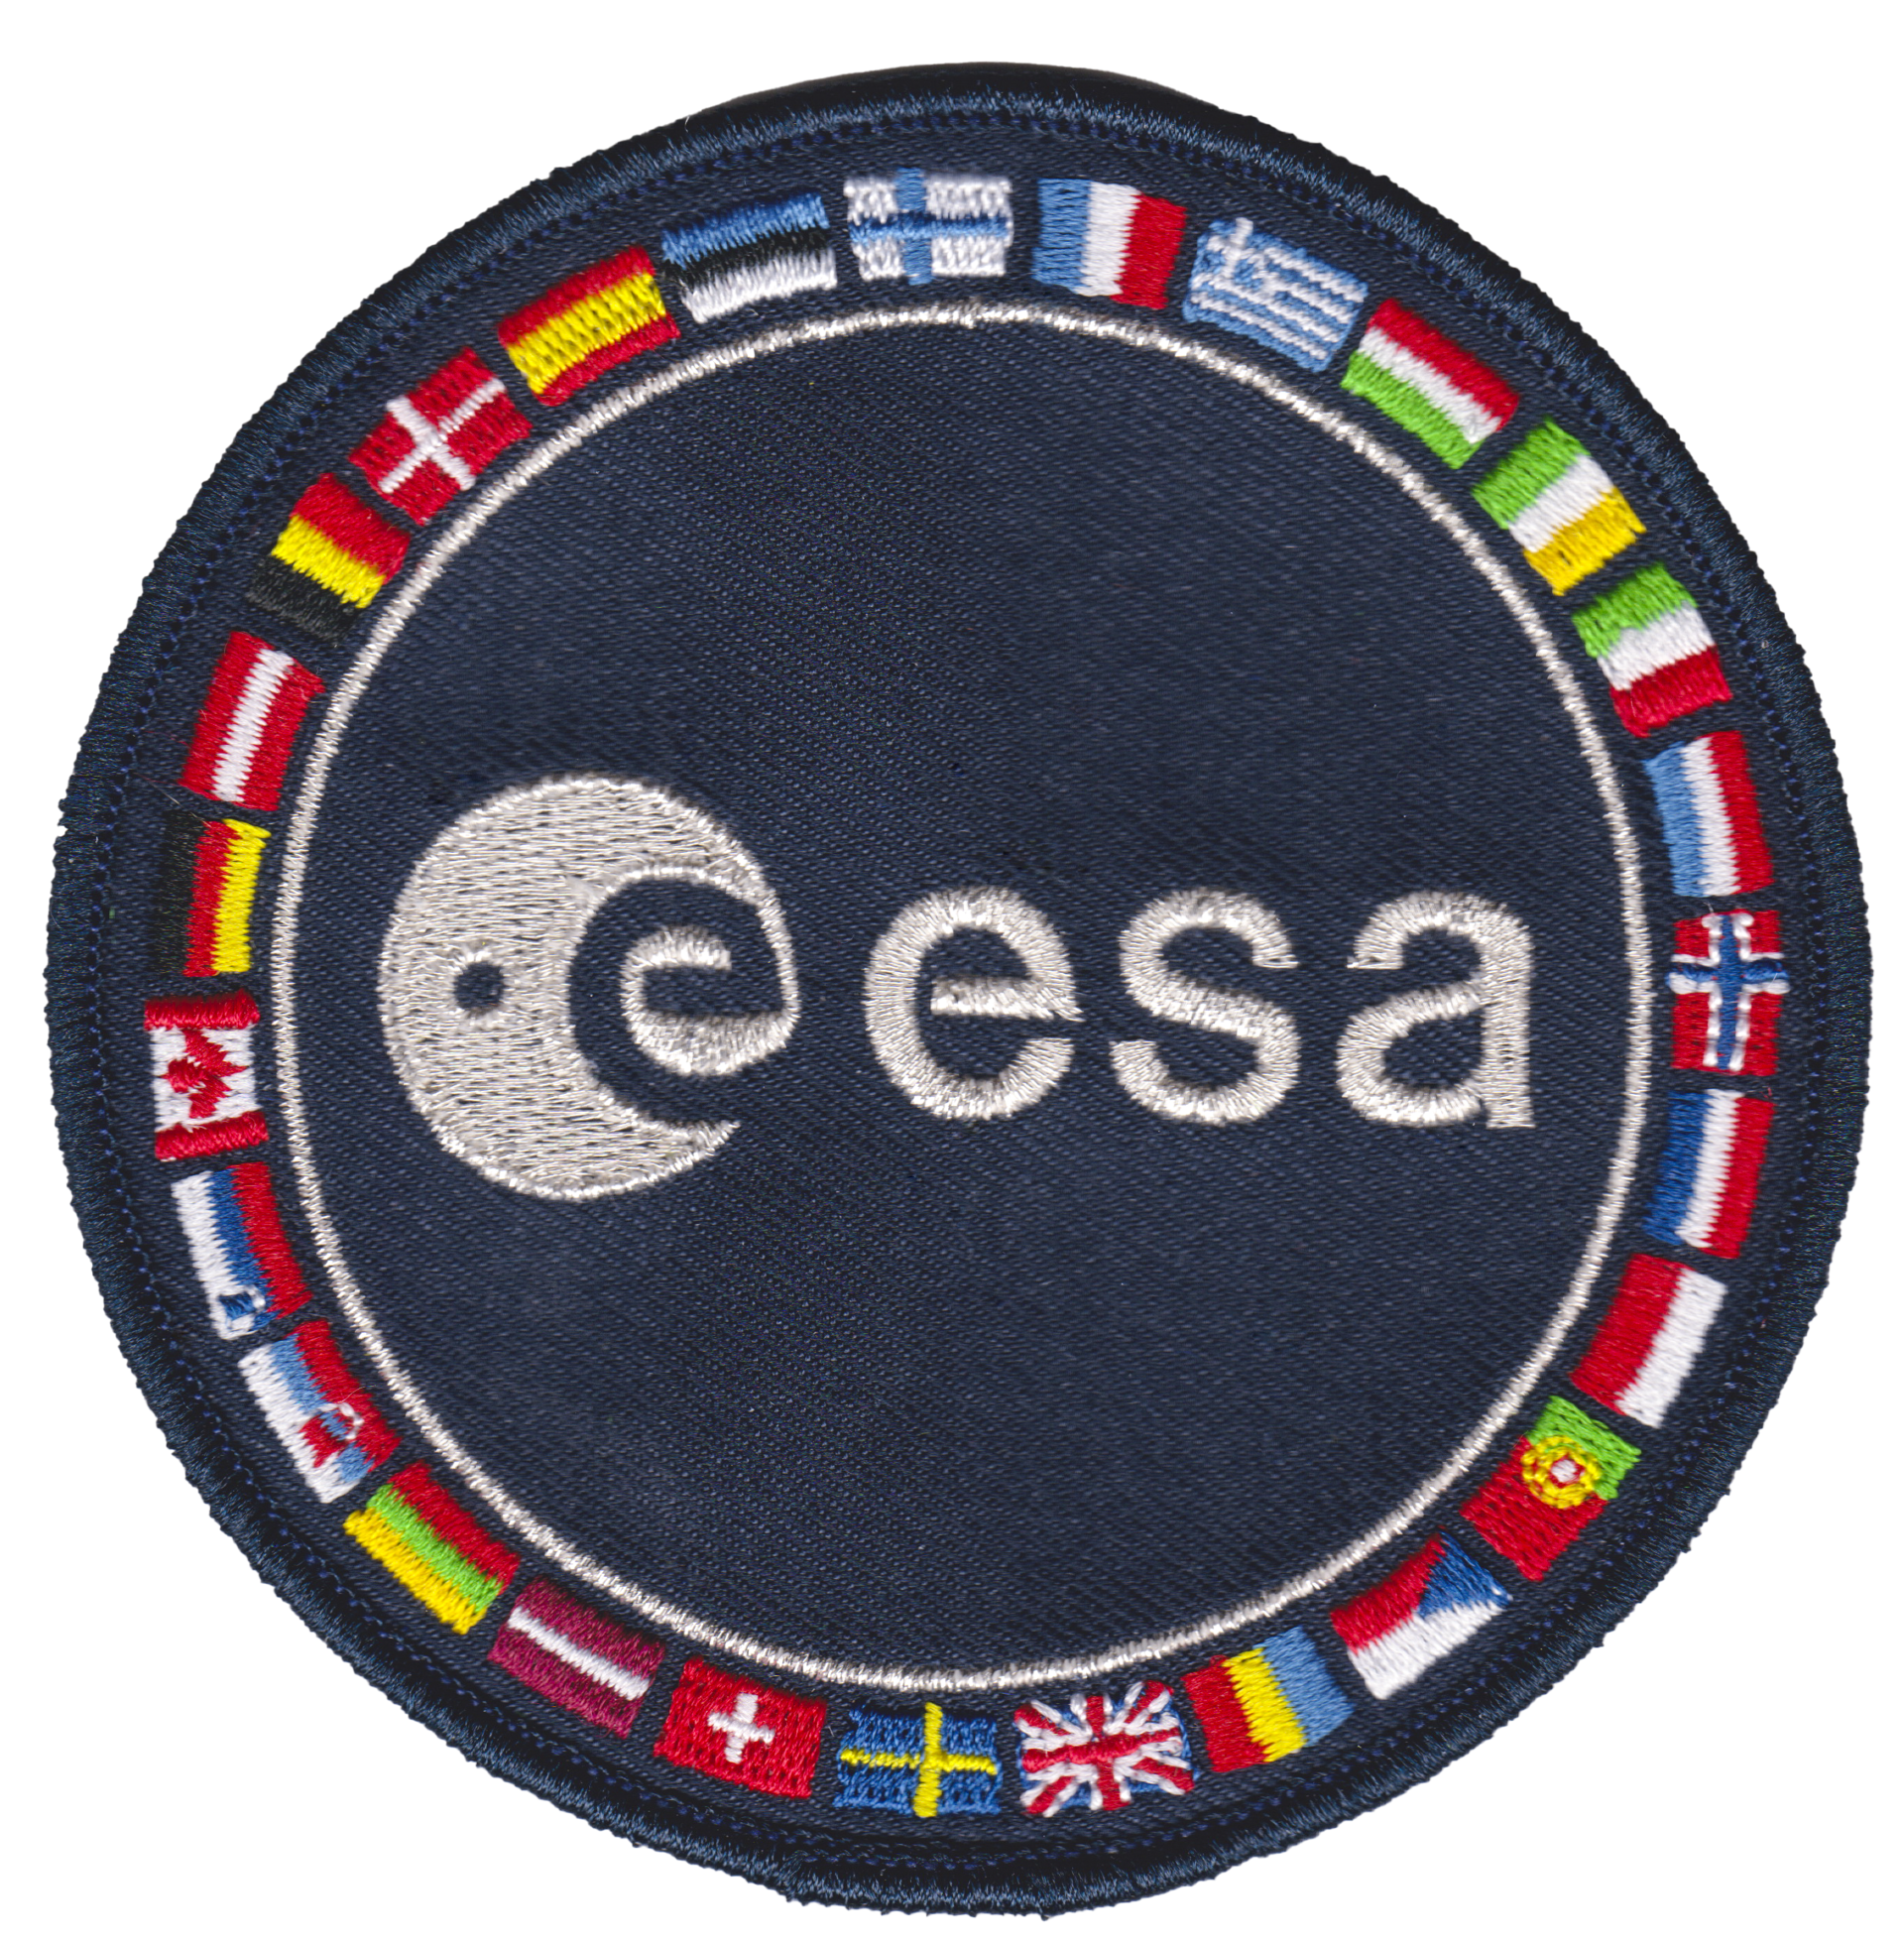 The 2022 update of the official ESA astronaut patch